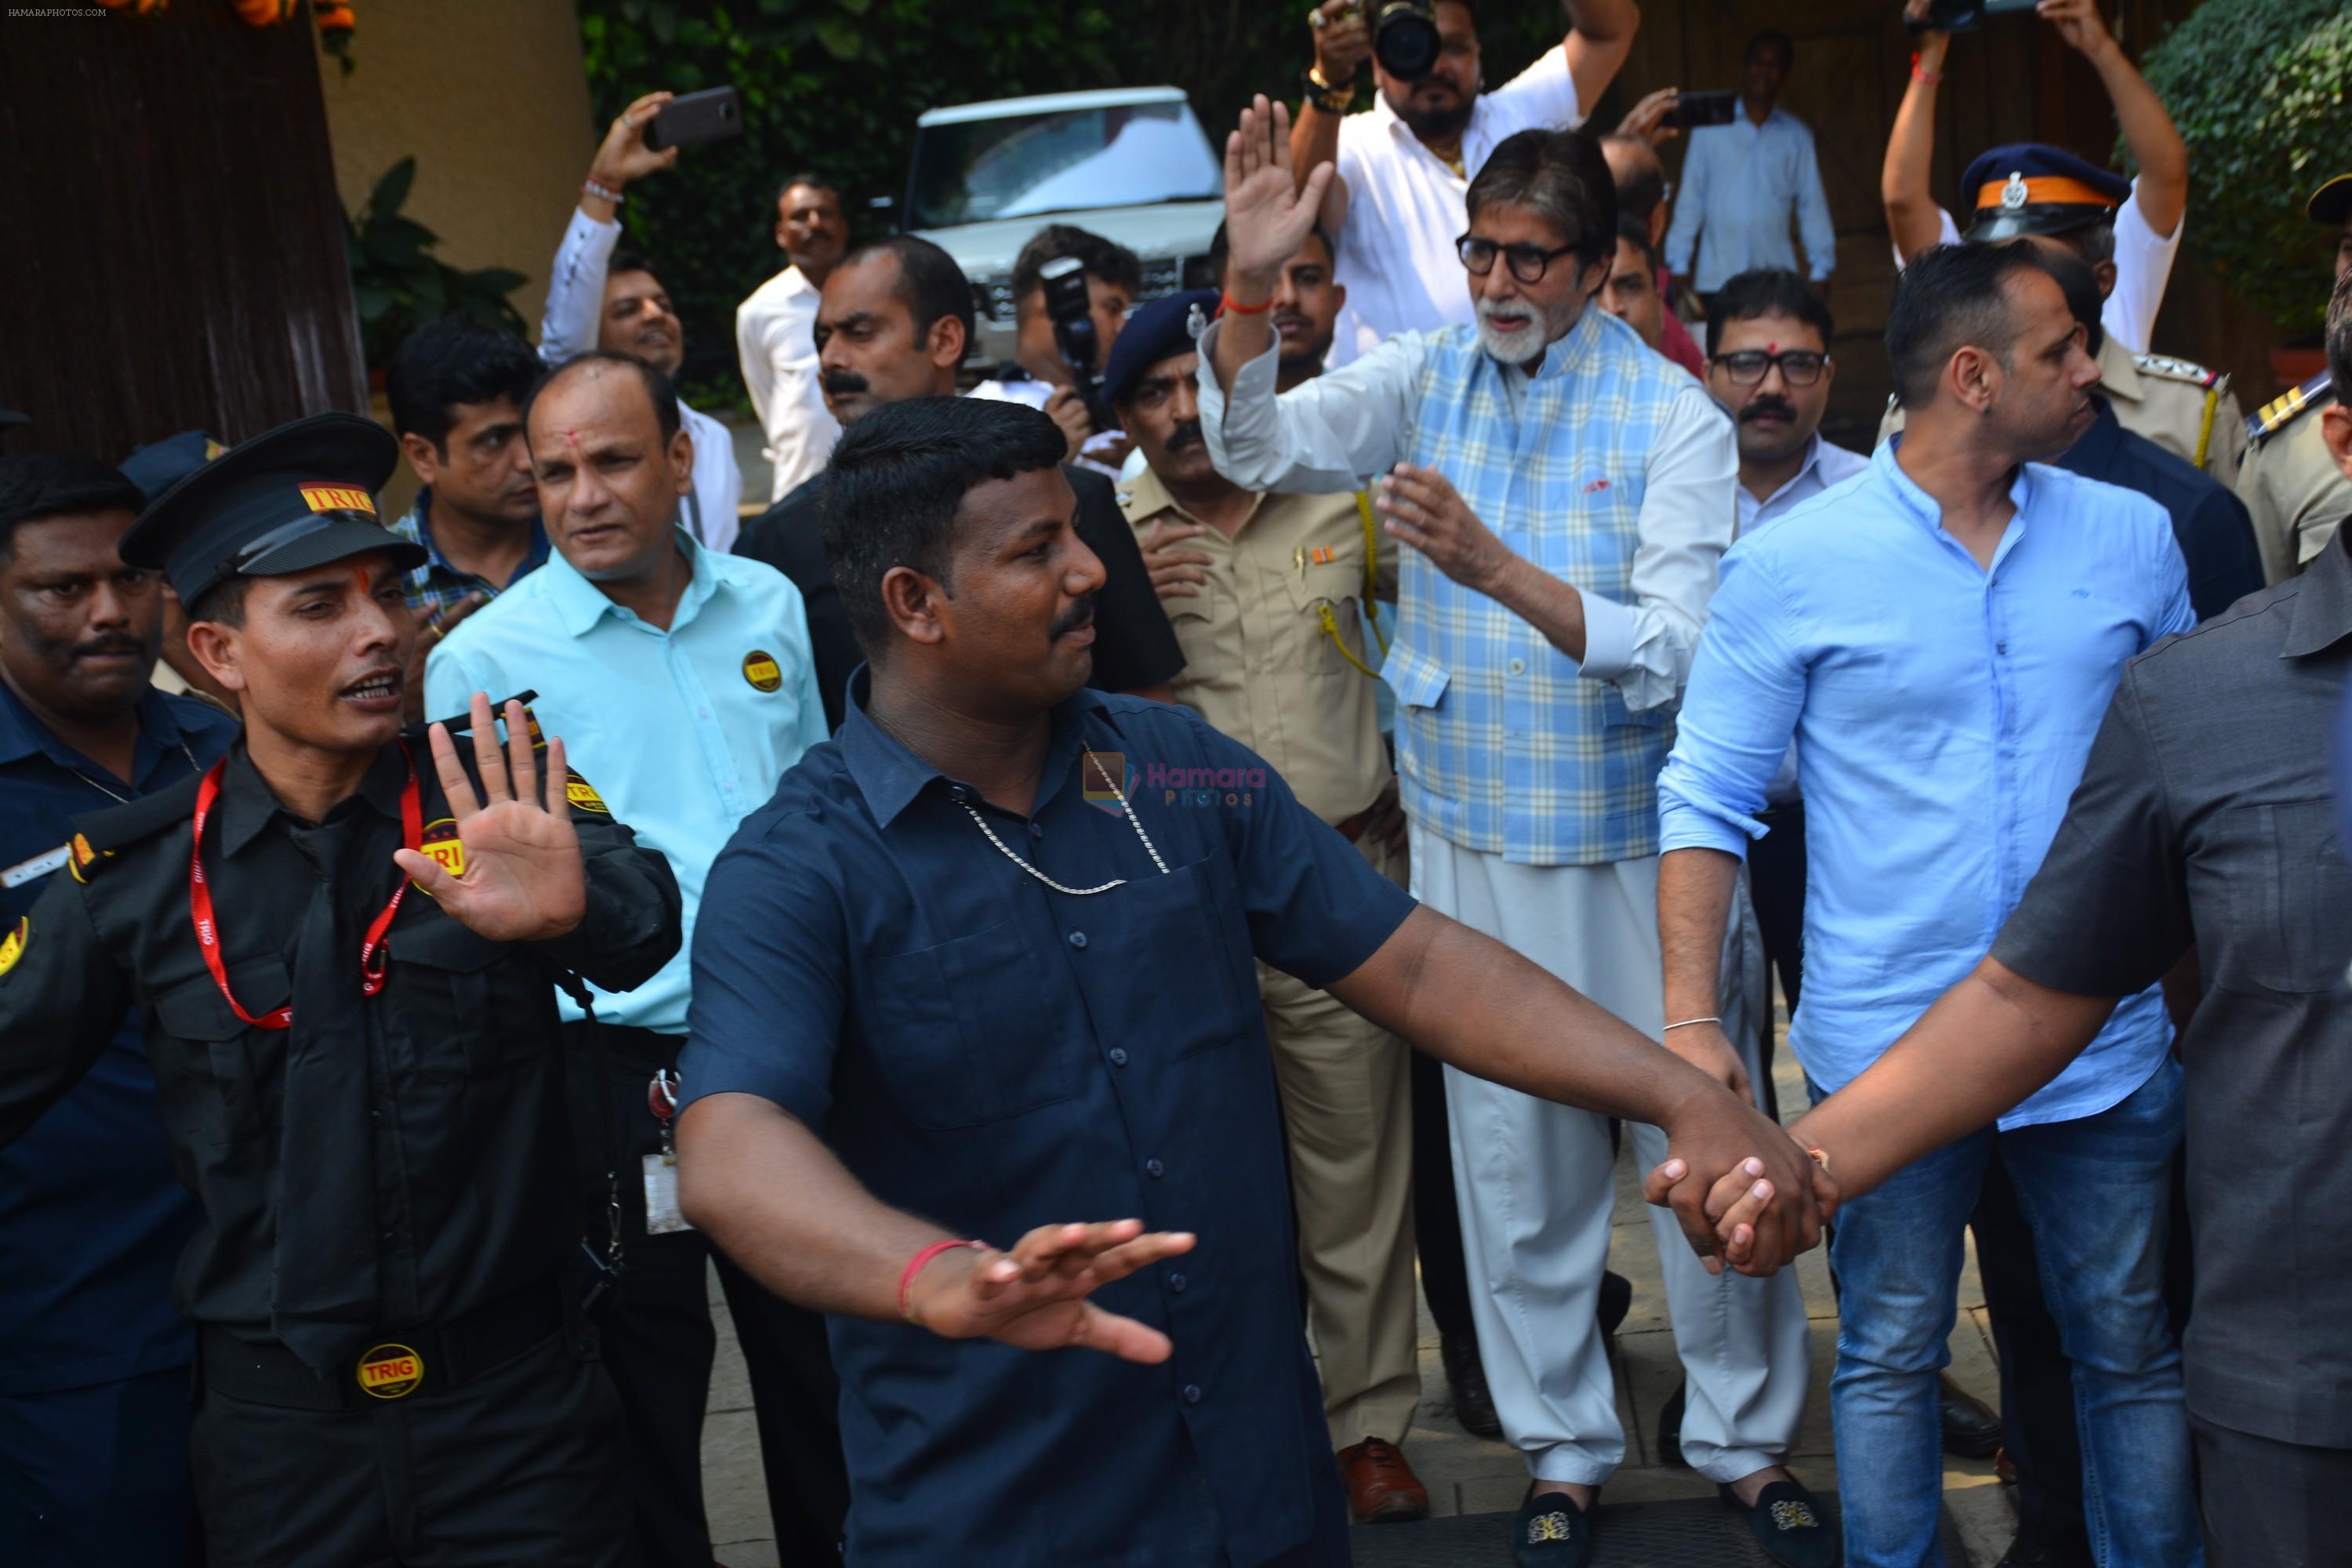 Amitabh Bachchan meets his fans on his birthday at his juhu house on 10th Oct 2018